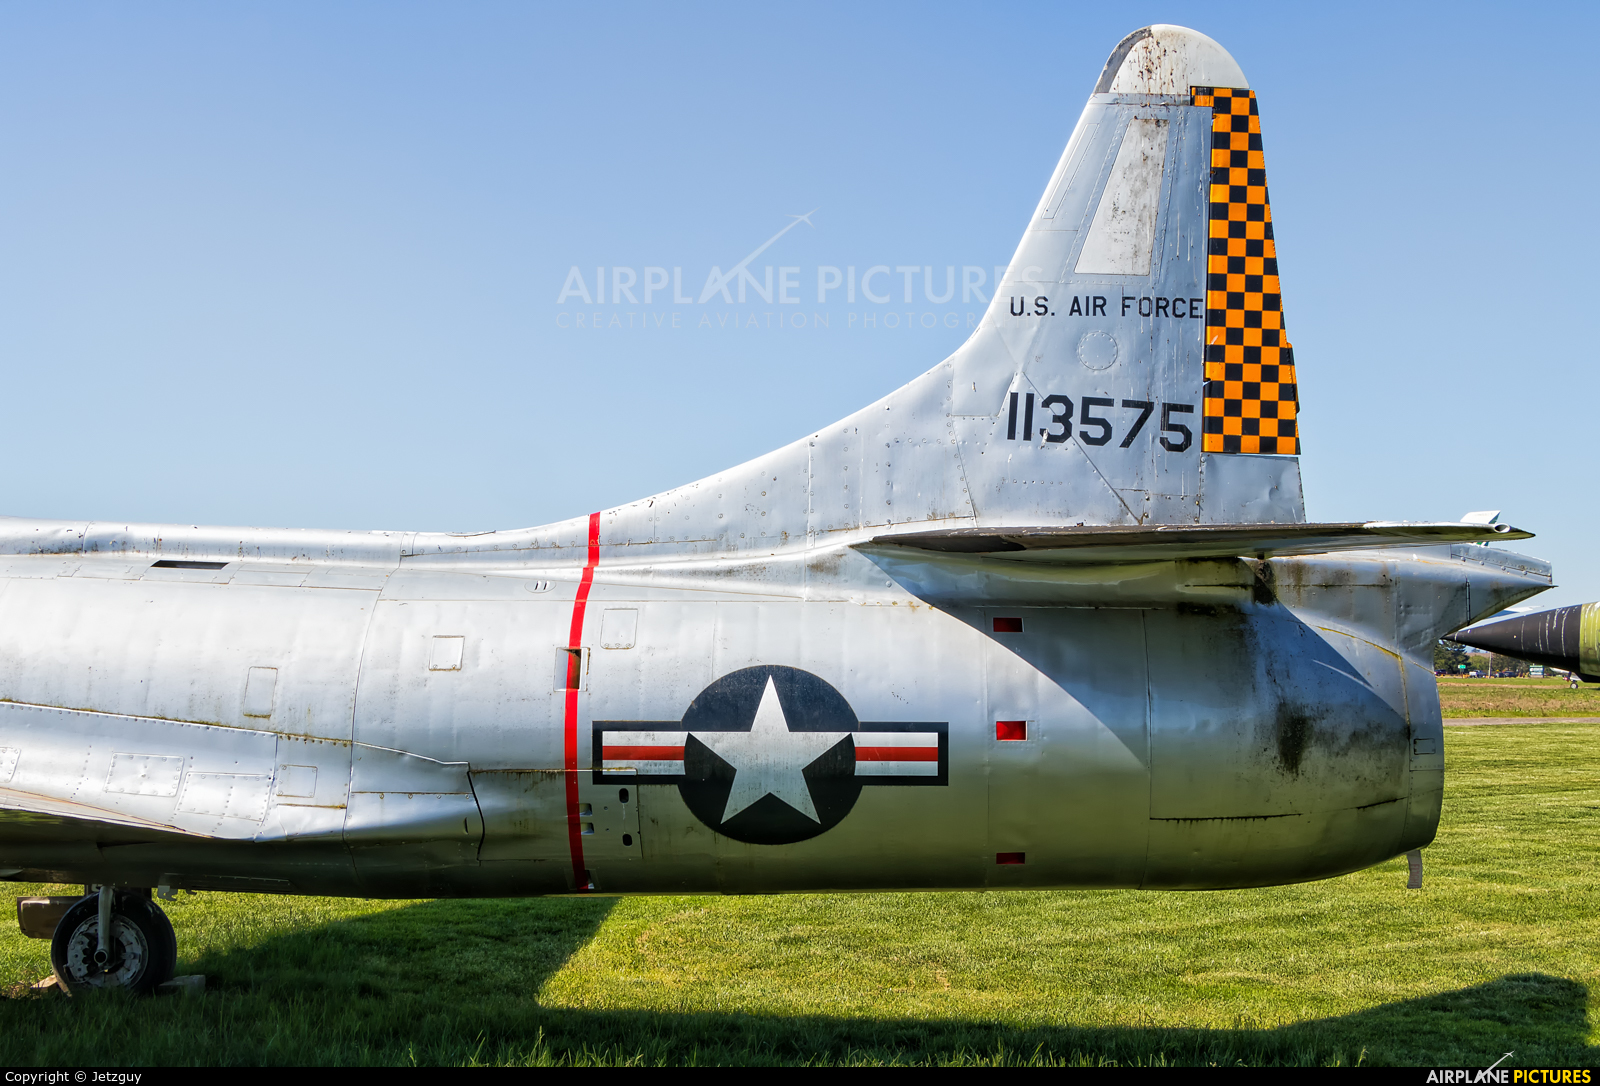 USA - Air Force 51-13575 aircraft at McMinnville - Evergreen Aviation & Space Museum